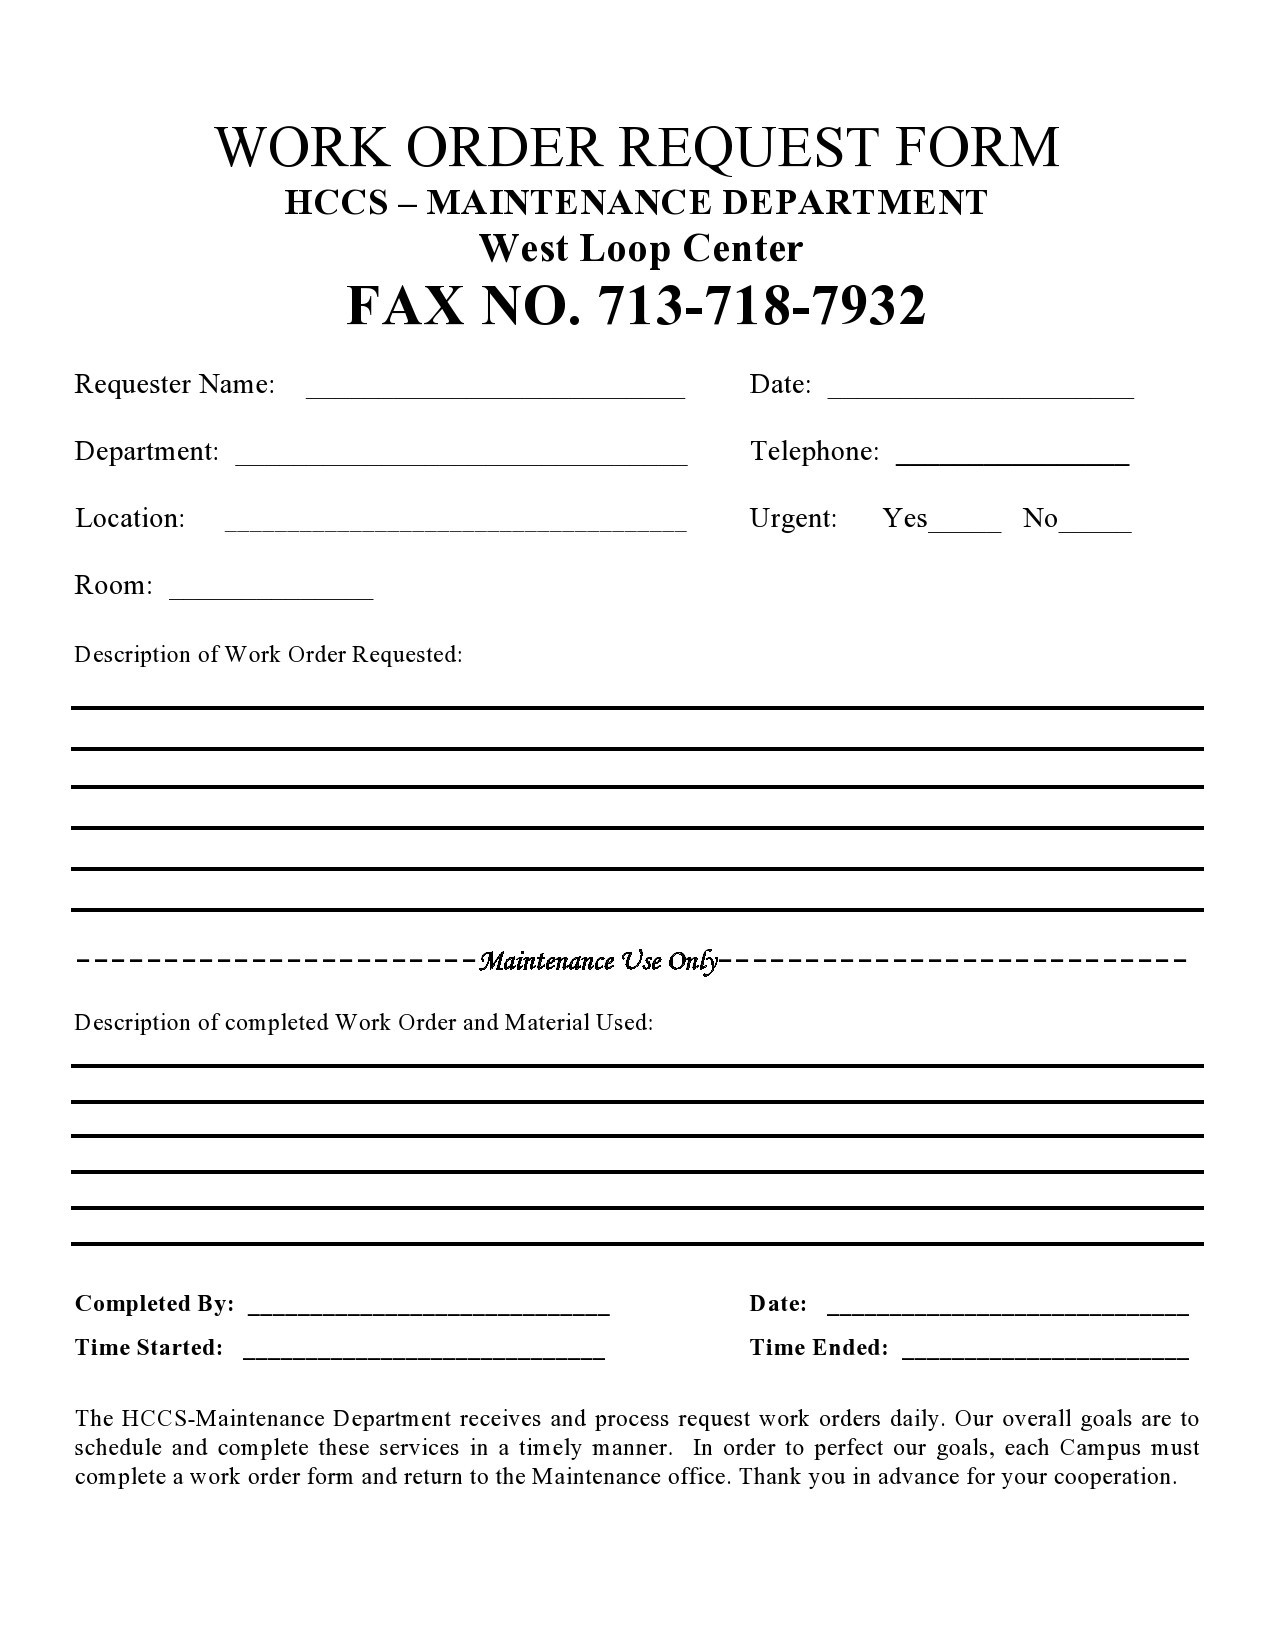 Tenant Work Order Request Form